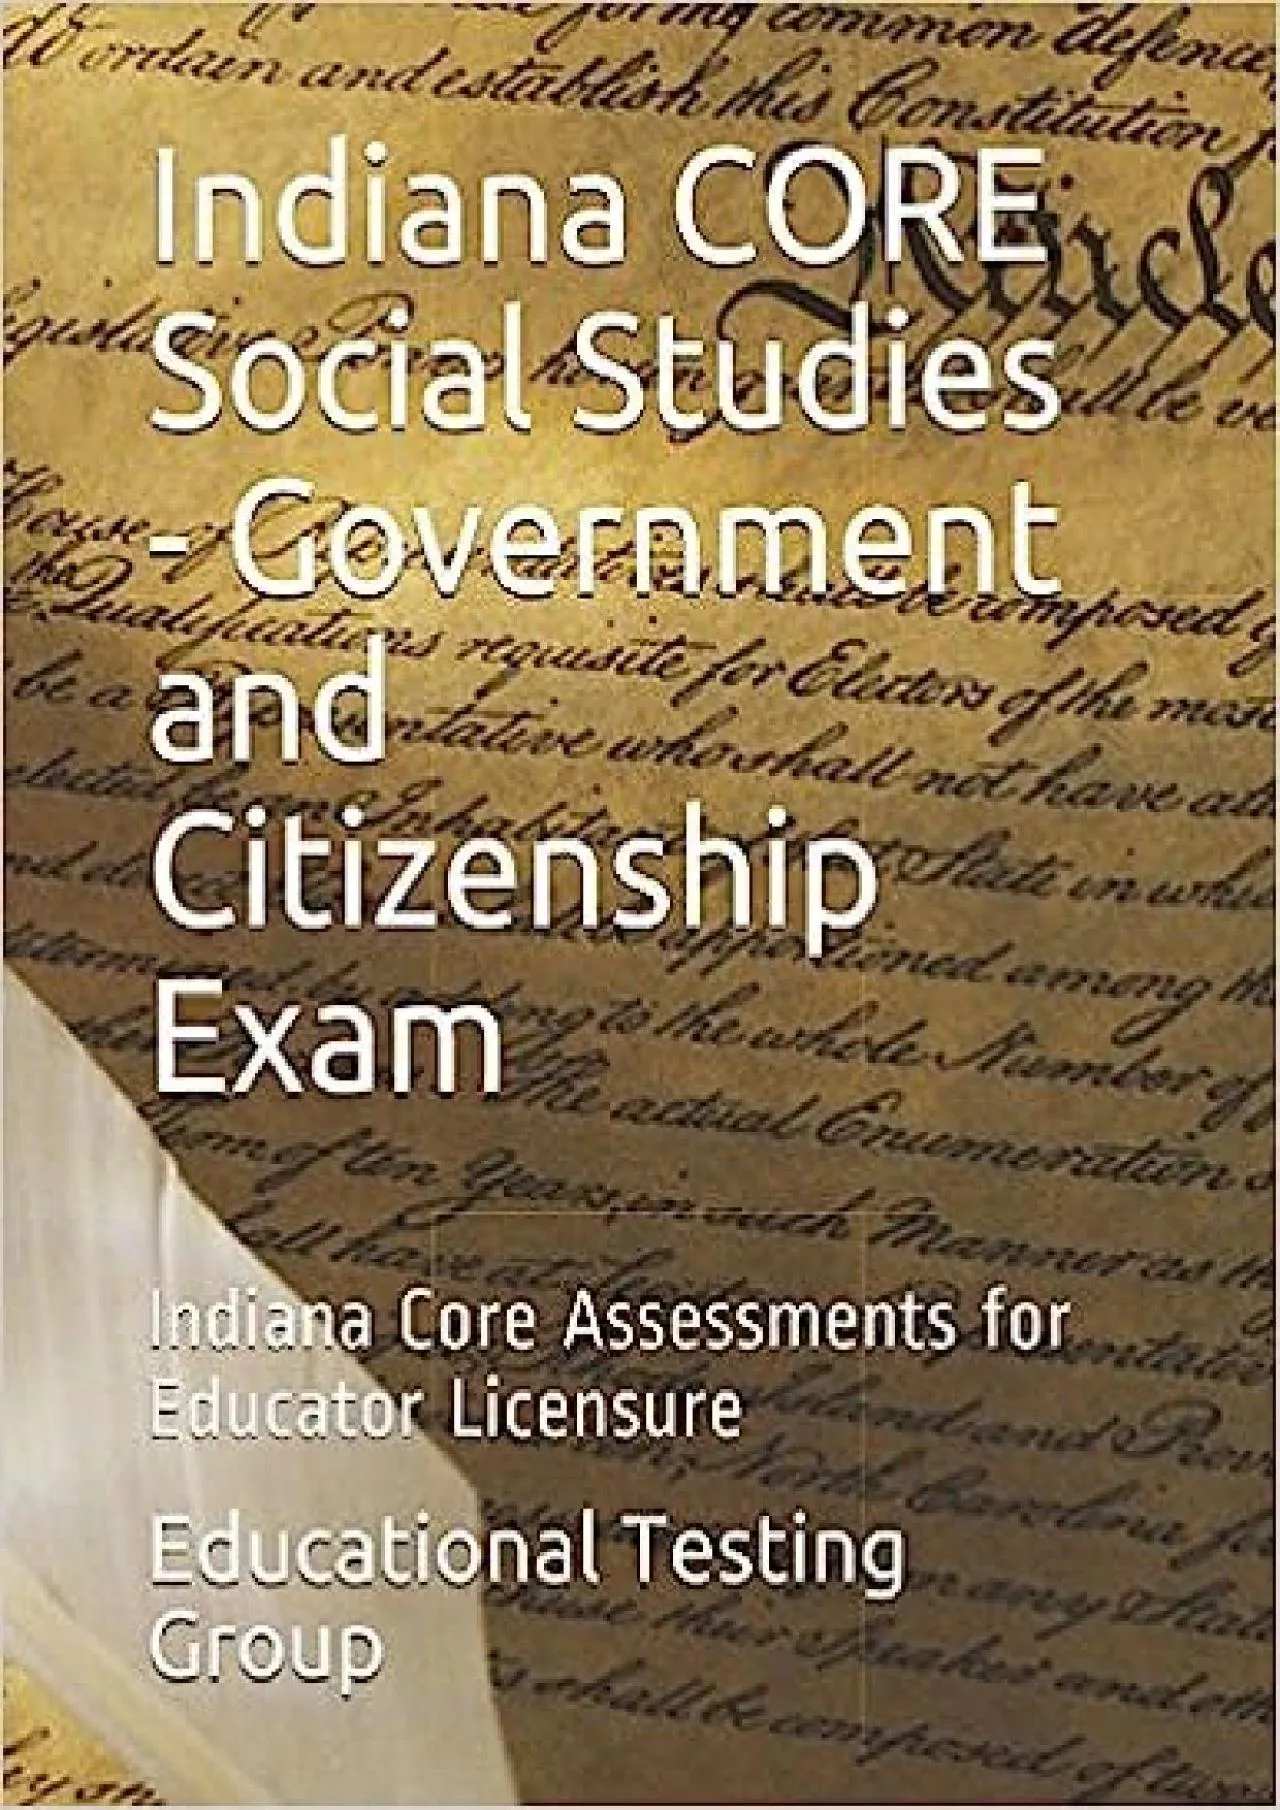 [DOWNLOAD] Indiana CORE Social Studies - Government and Citizenship Exam: Indiana Core